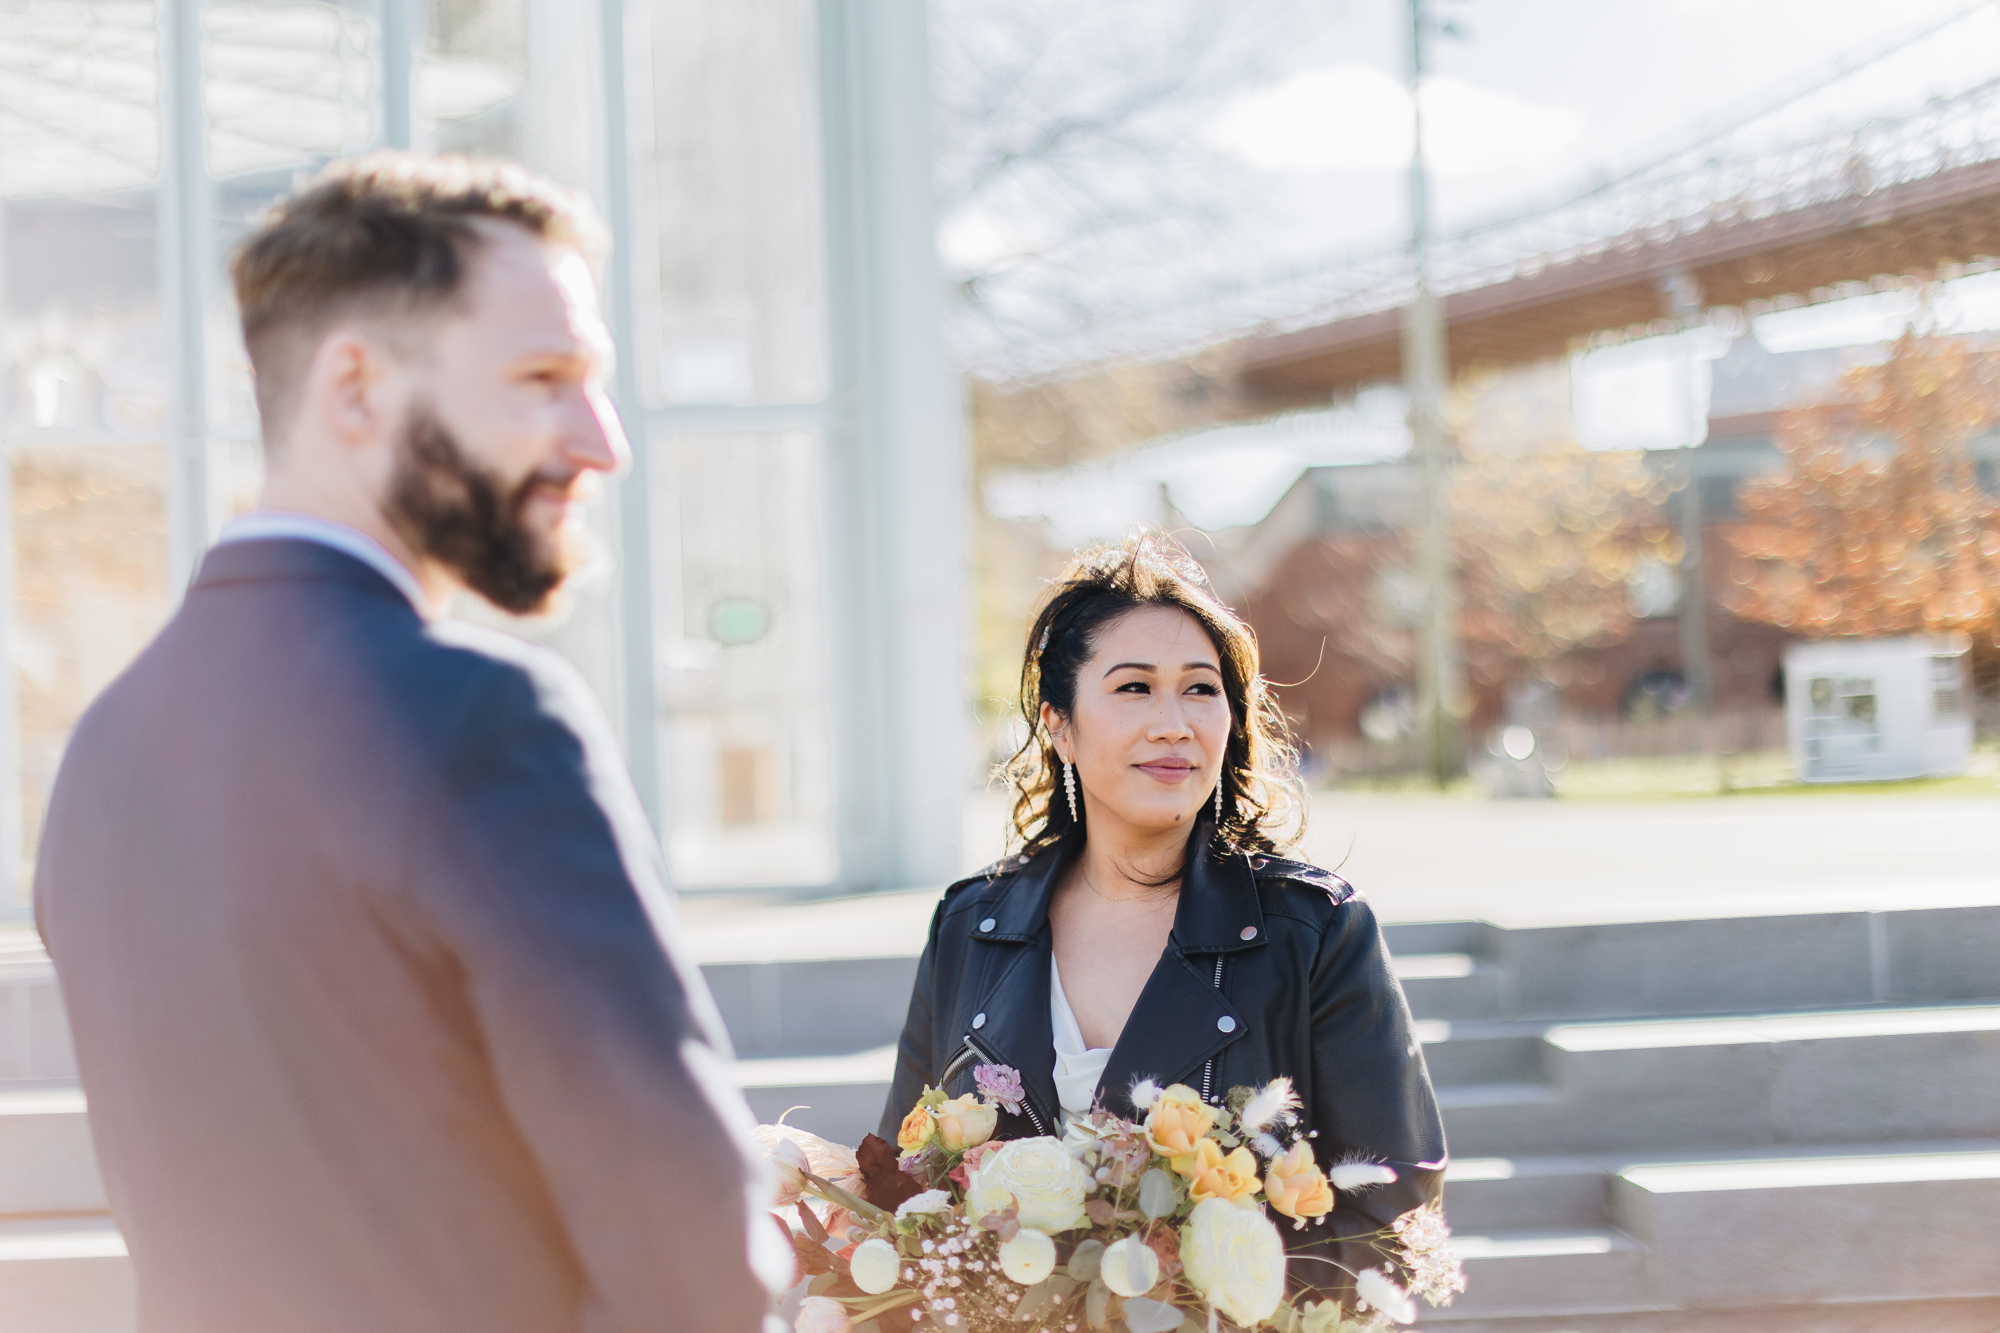 Pretty Fall DUMBO Elopement with NYC views and foliage